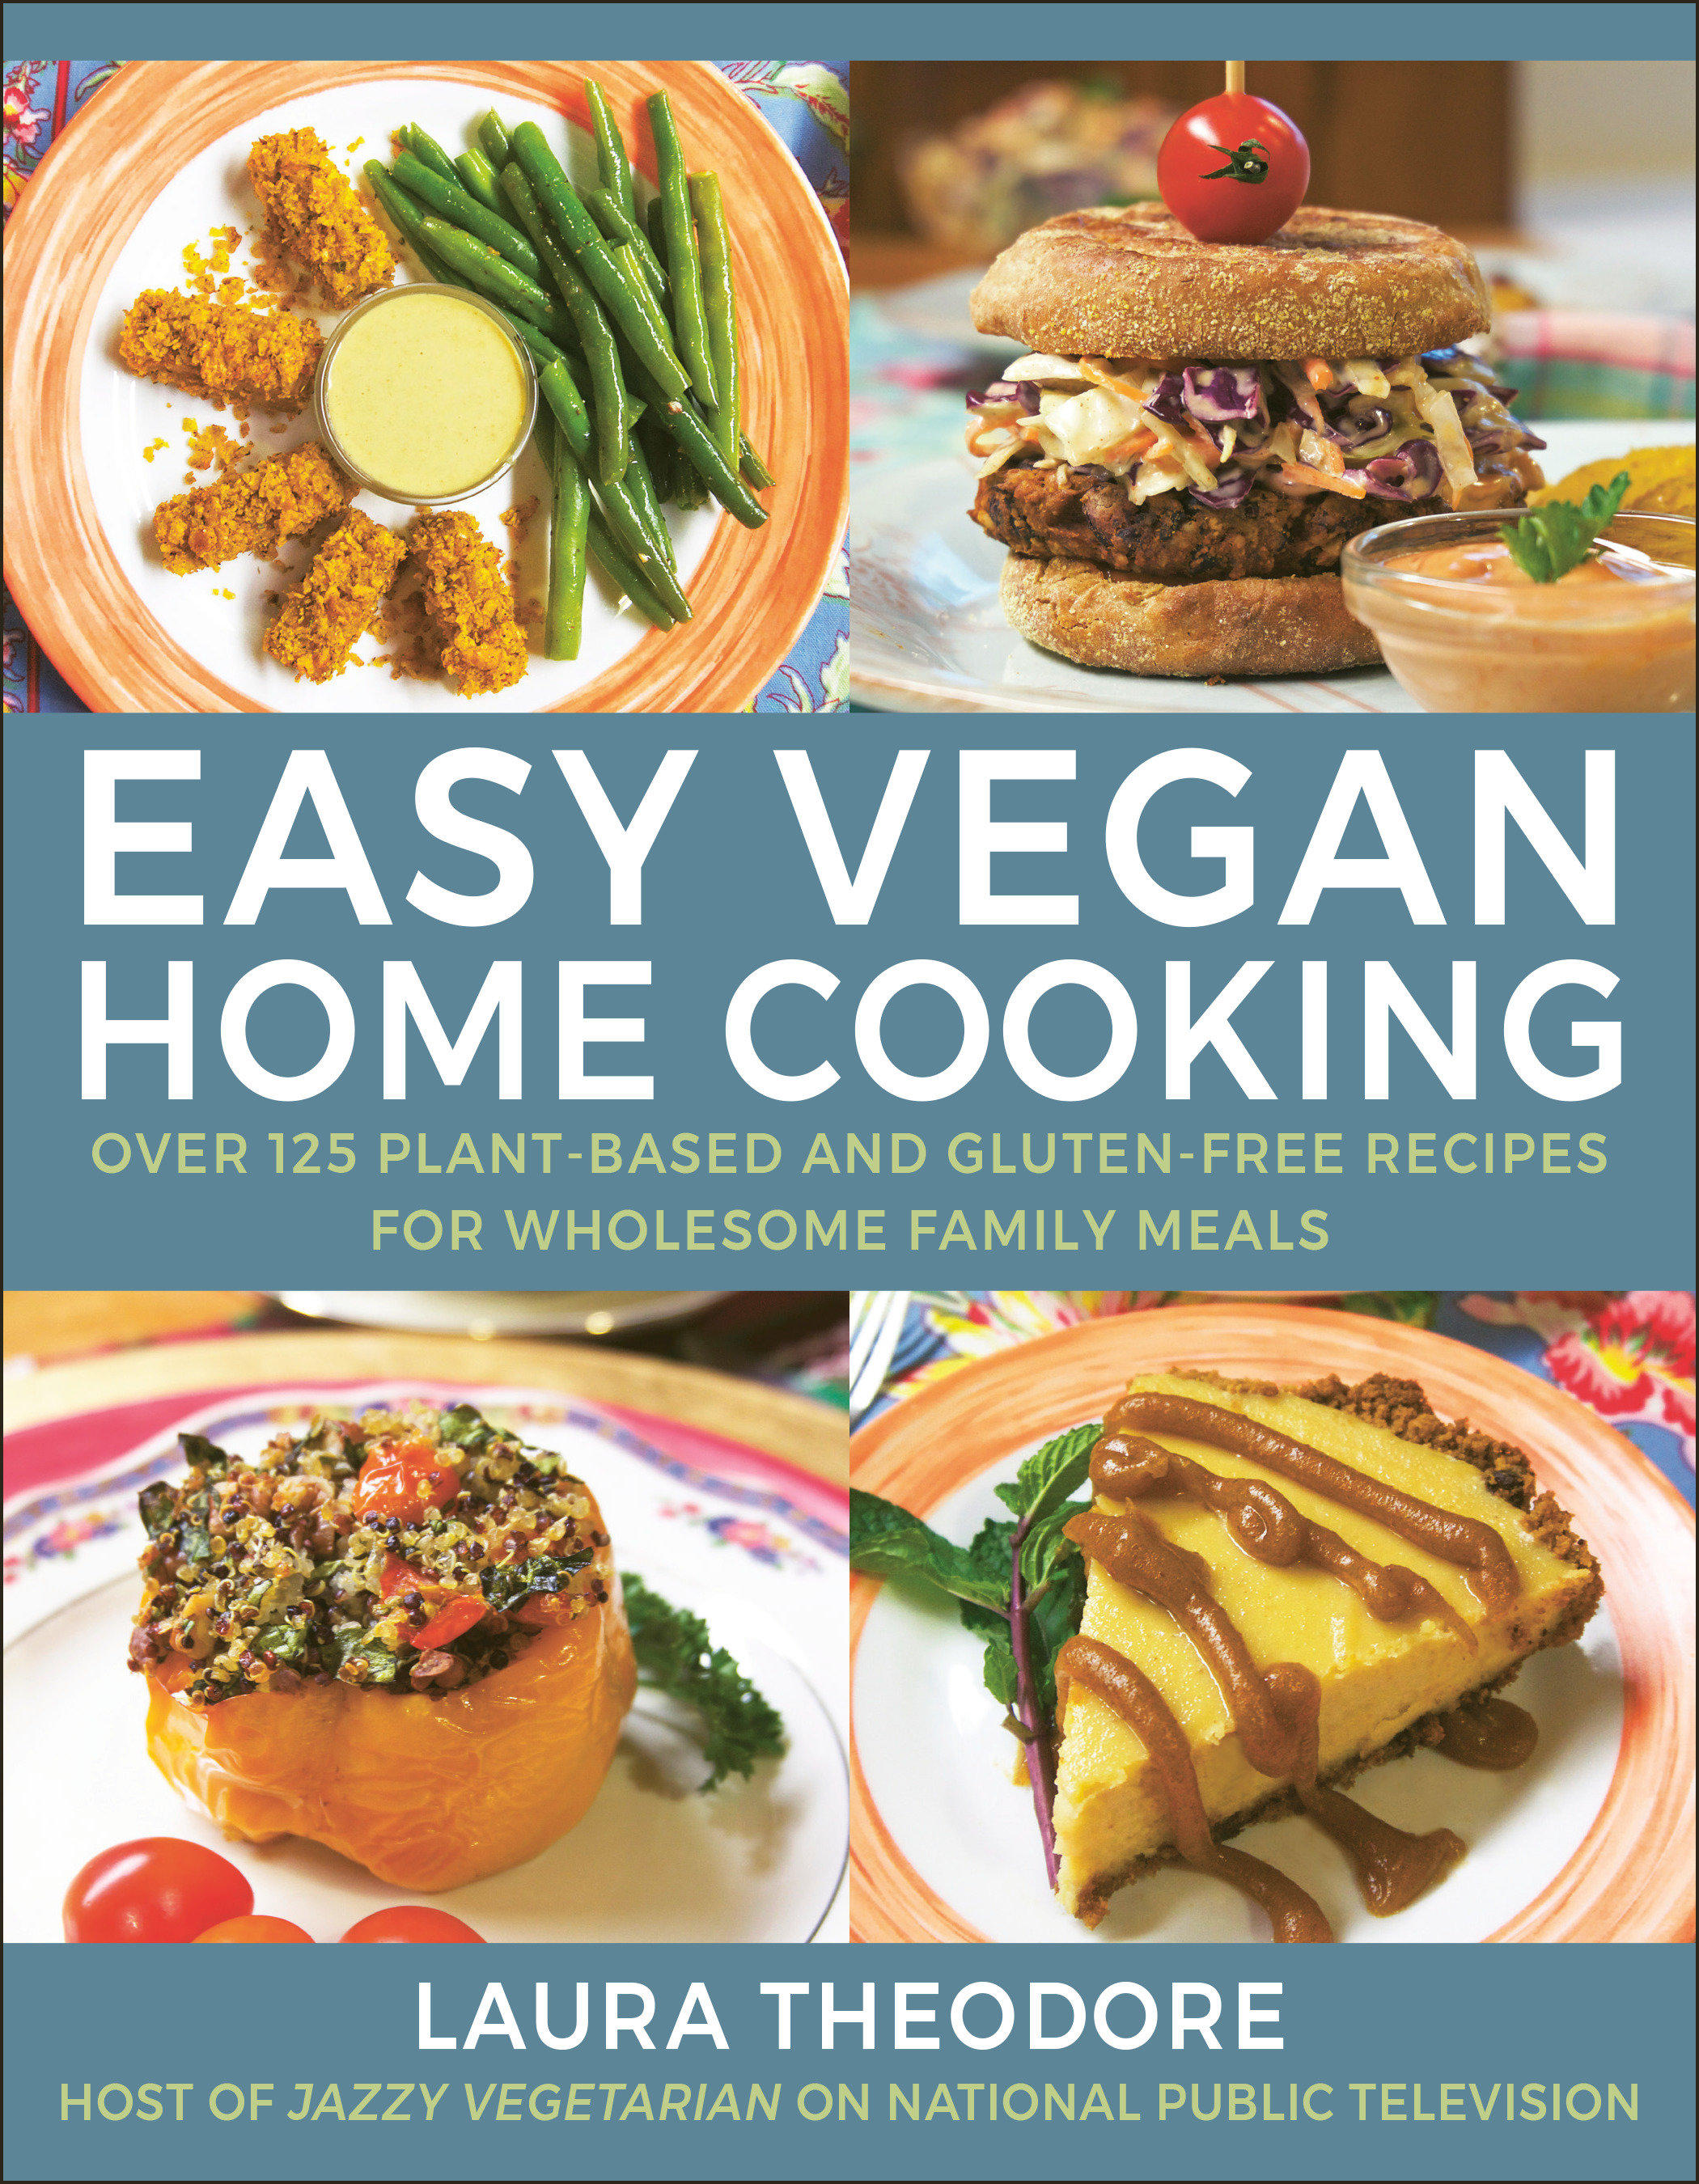 Easy Vegan Home Cooking (Hardcover Book)